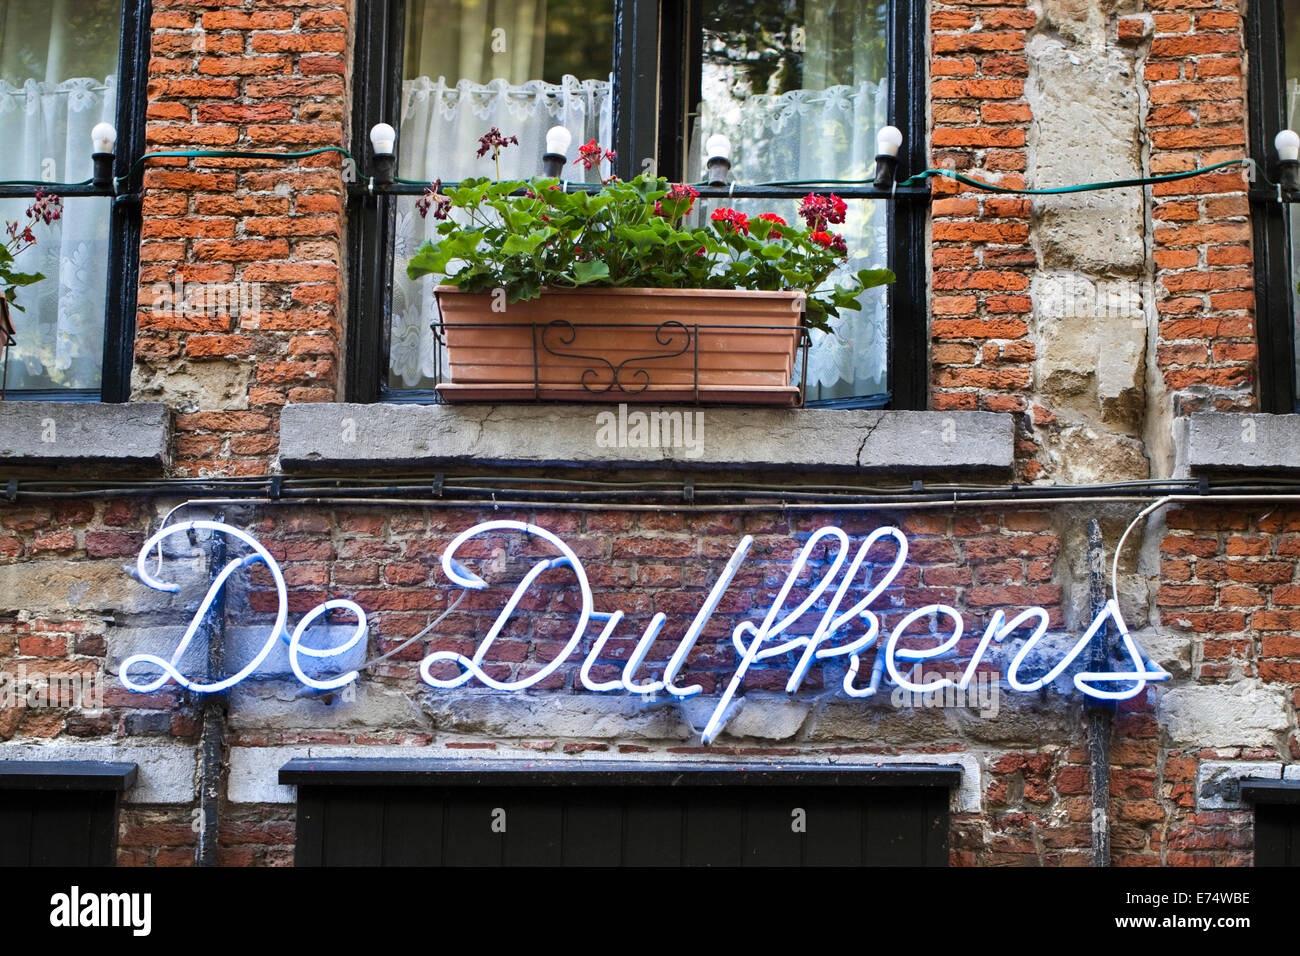 Cafe 'De Duifkens' in Antwerp, Belgium, a very popular place to eat and drink near the Antwerp theatres. Stock Photo